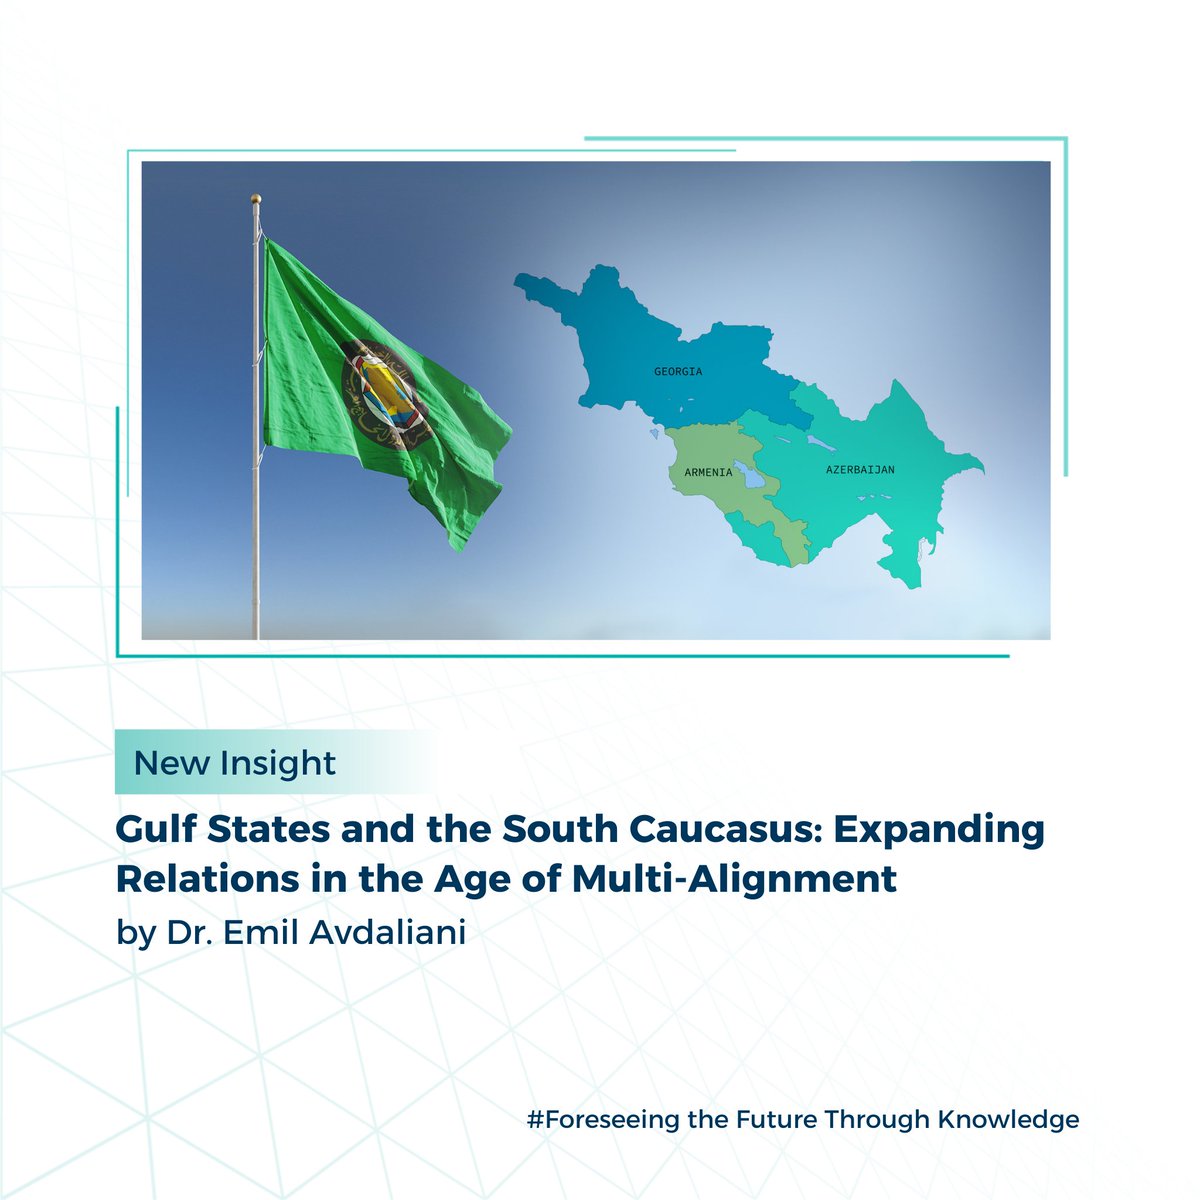 TRENDS has published a new insight entitled “Gulf States and the South Caucasus: Expanding Relations in the Age of Multi-Alignment” by Dr. Emil Avdaliani, Professor of international relations at European University in Tbilisi, Georgia. bit.ly/4agl24z #TRENDS…